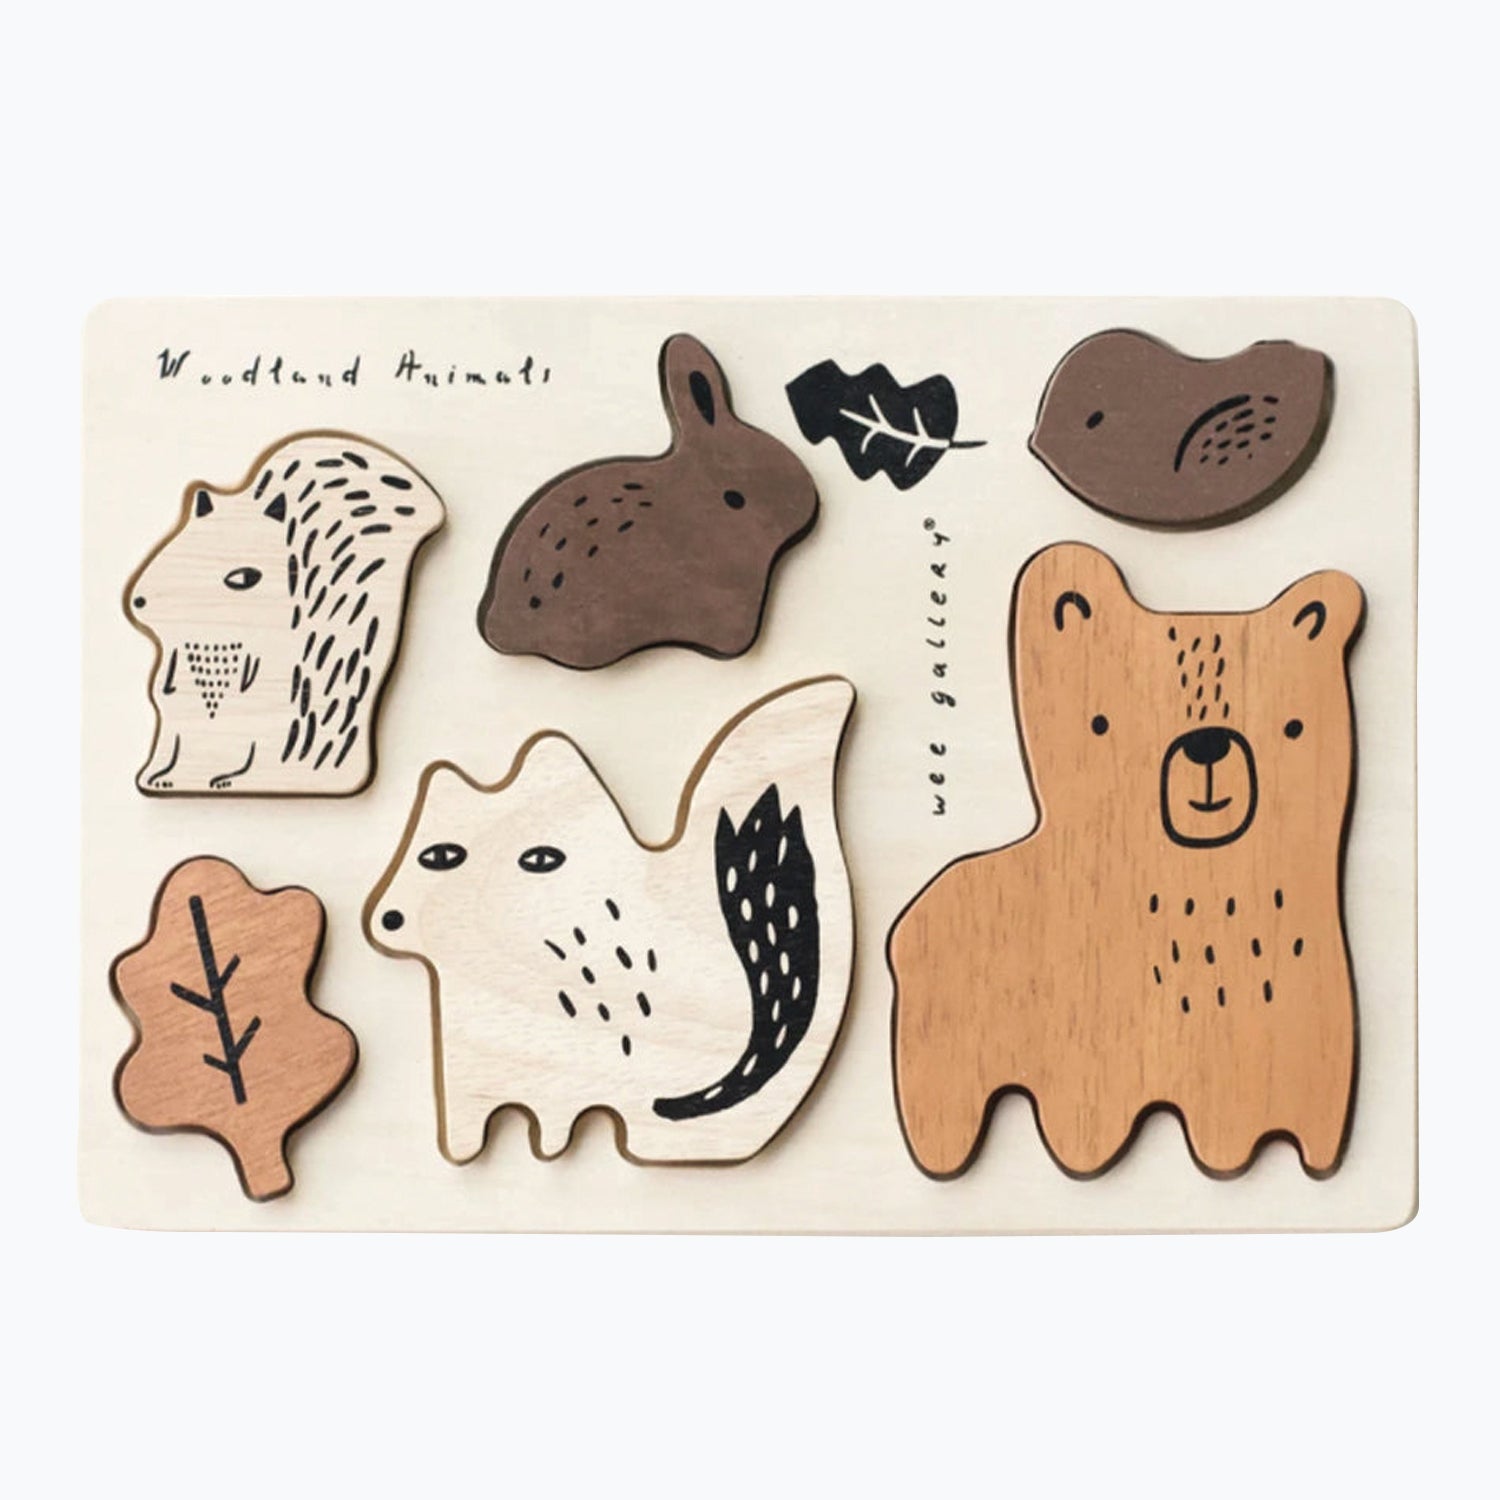 An image of Wooden Woodland puzzle - Kids Puzzle - Woodland Animal Tray Puzzle | Wee Gallery